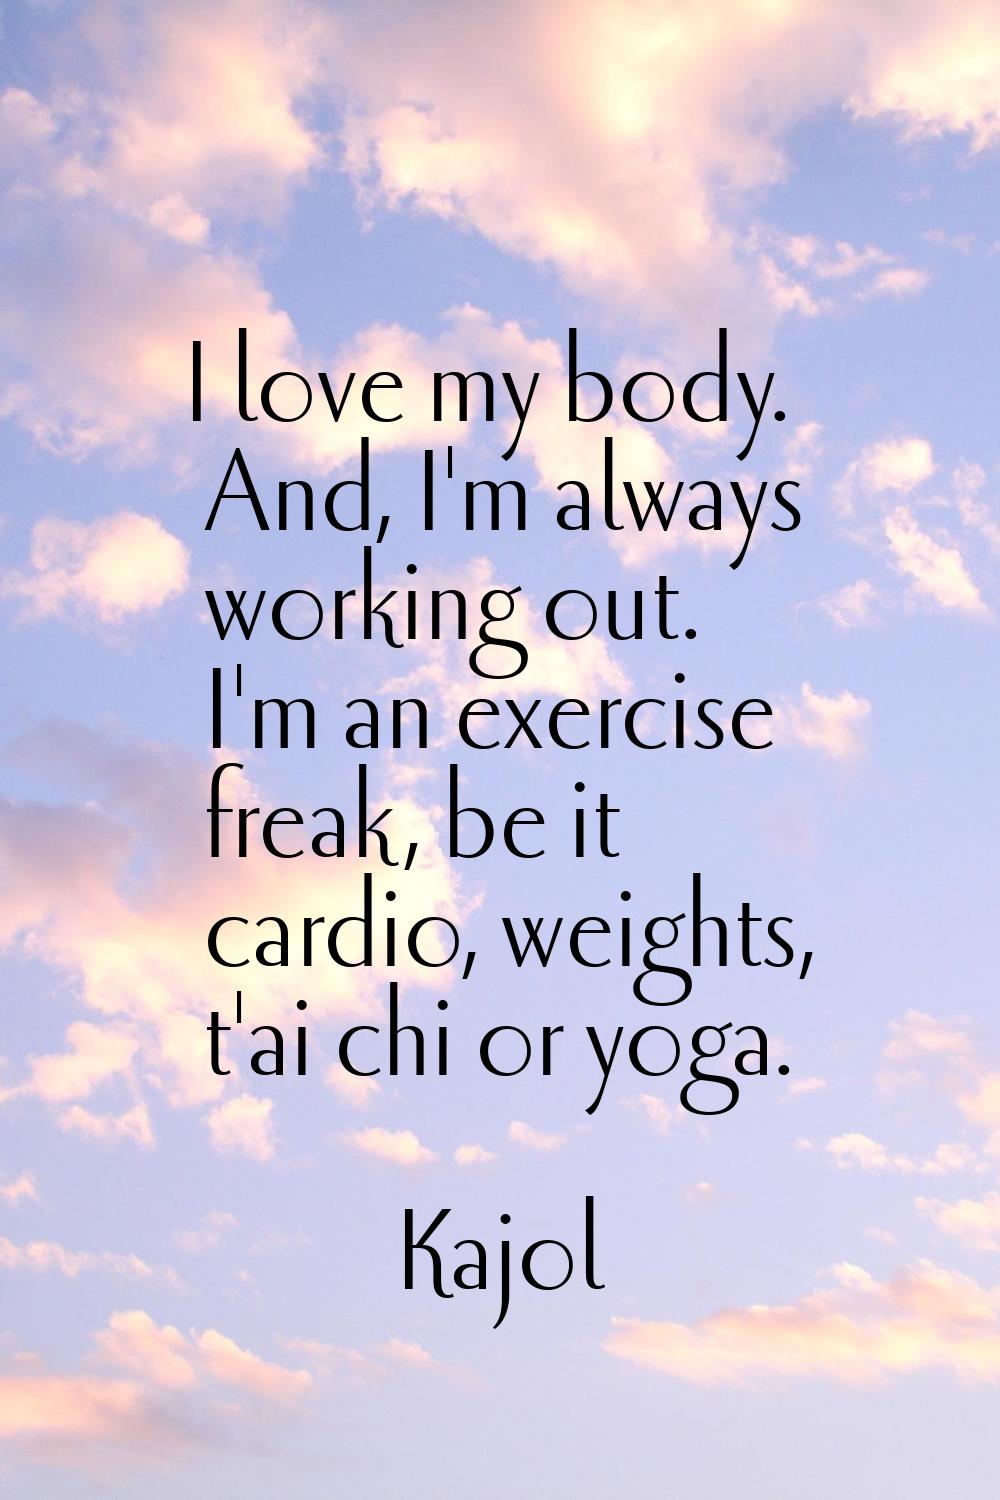 I love my body. And, I'm always working out. I'm an exercise freak, be it cardio, weights, t'ai chi